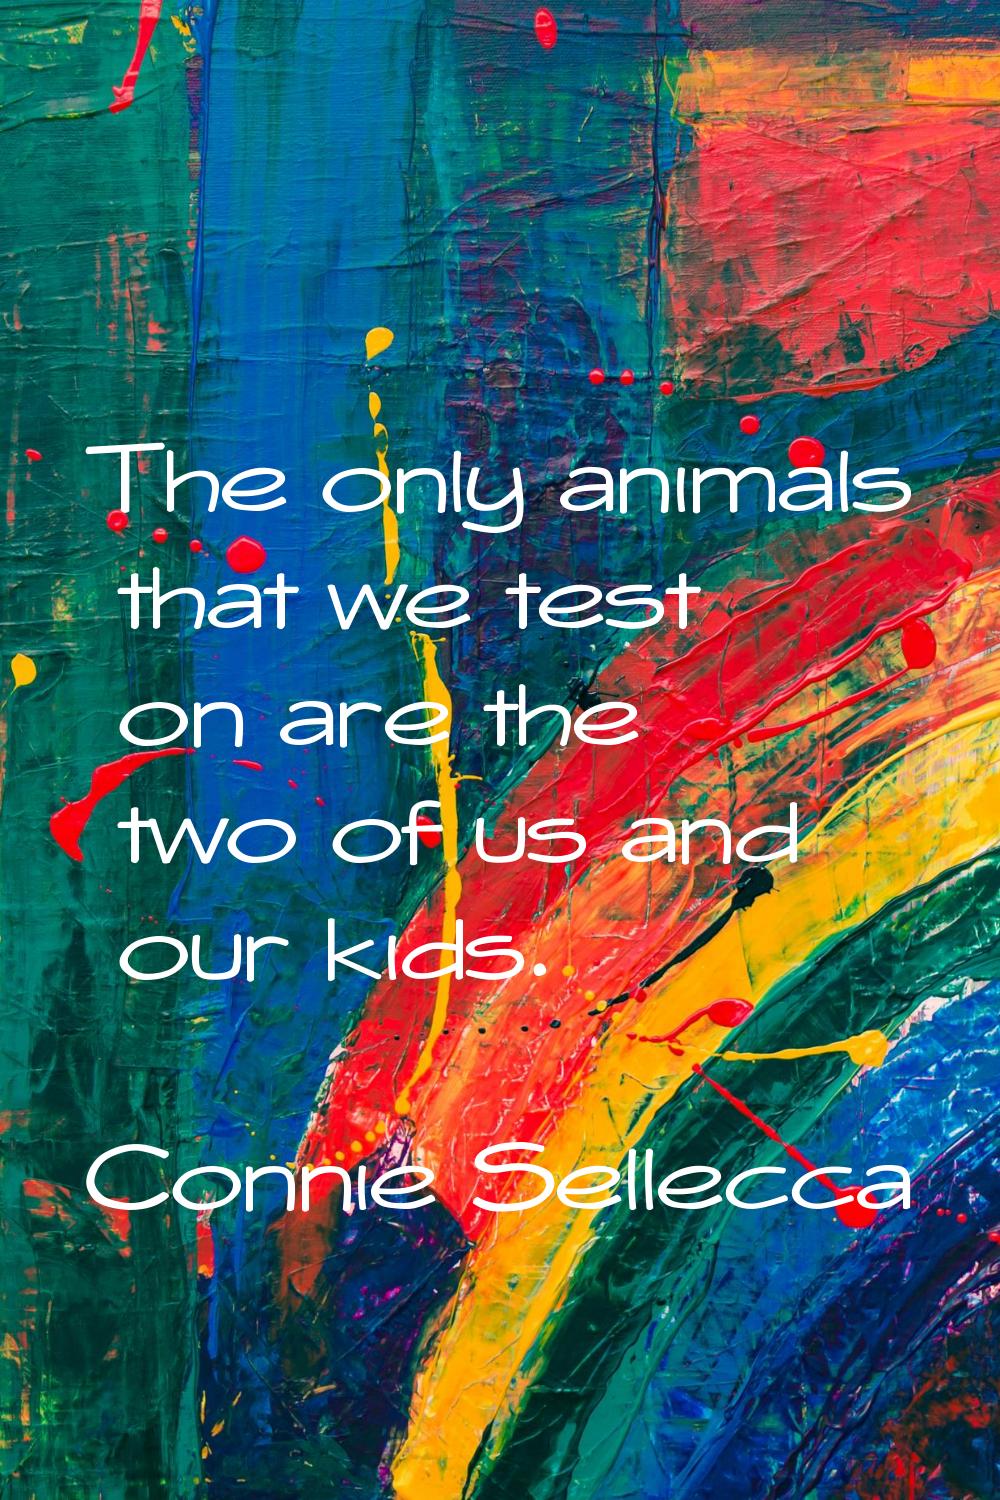 The only animals that we test on are the two of us and our kids.